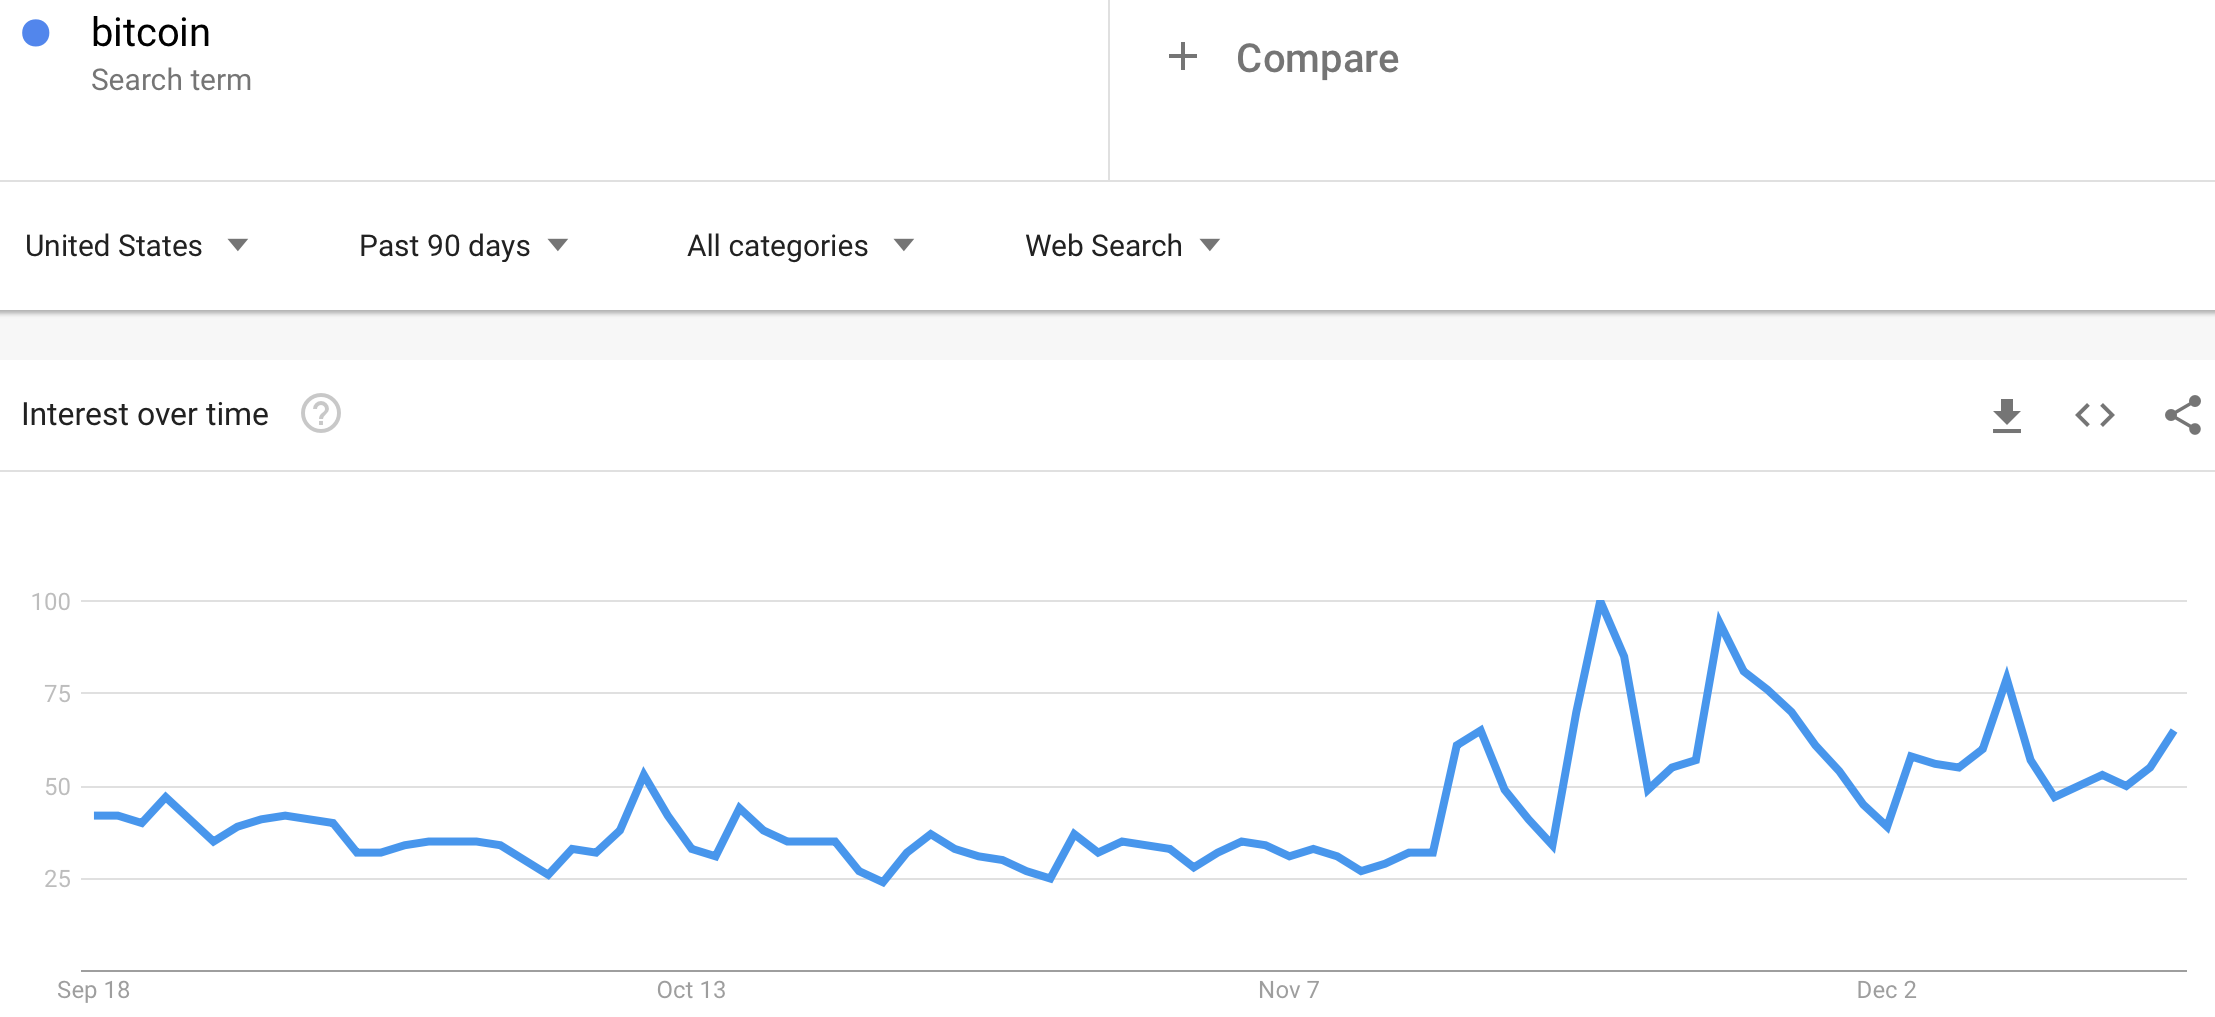 Google Trends finally came to life after Bitcoin (BTC/USD) plunged in mid-November as part of a major breakdown and new 2018 lows. That search interest is still at an elevated level a month later as BTC/USD continues to sell off.